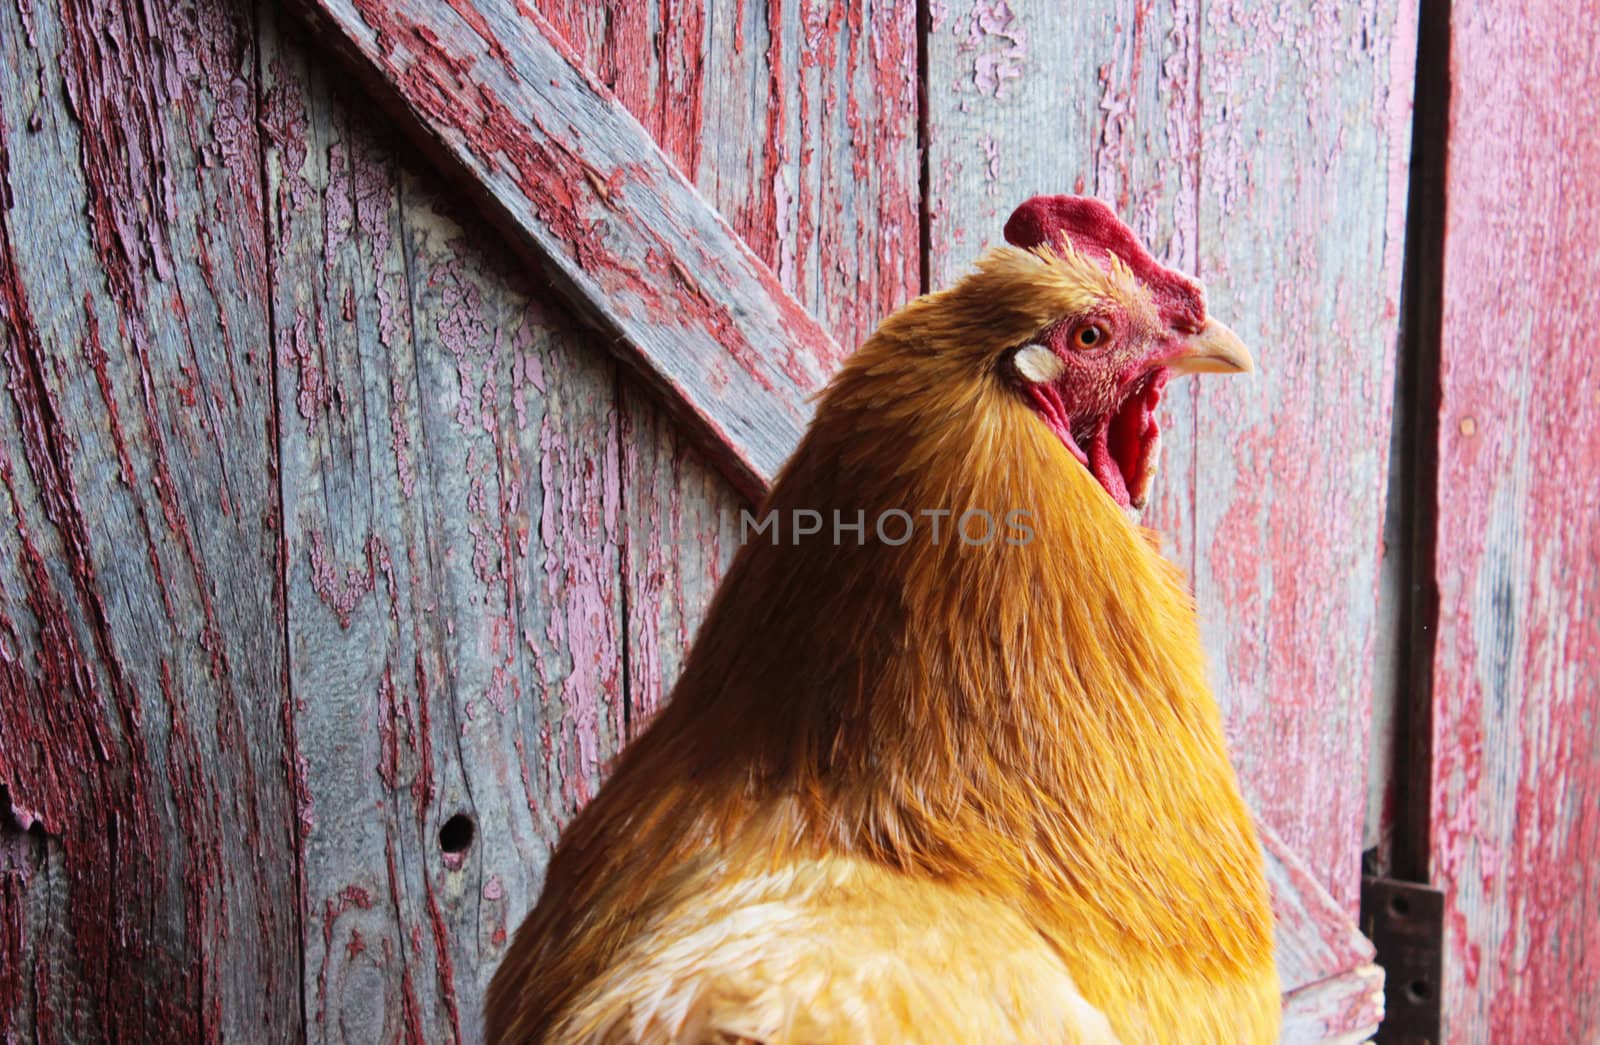 Rooster III by travellinjess